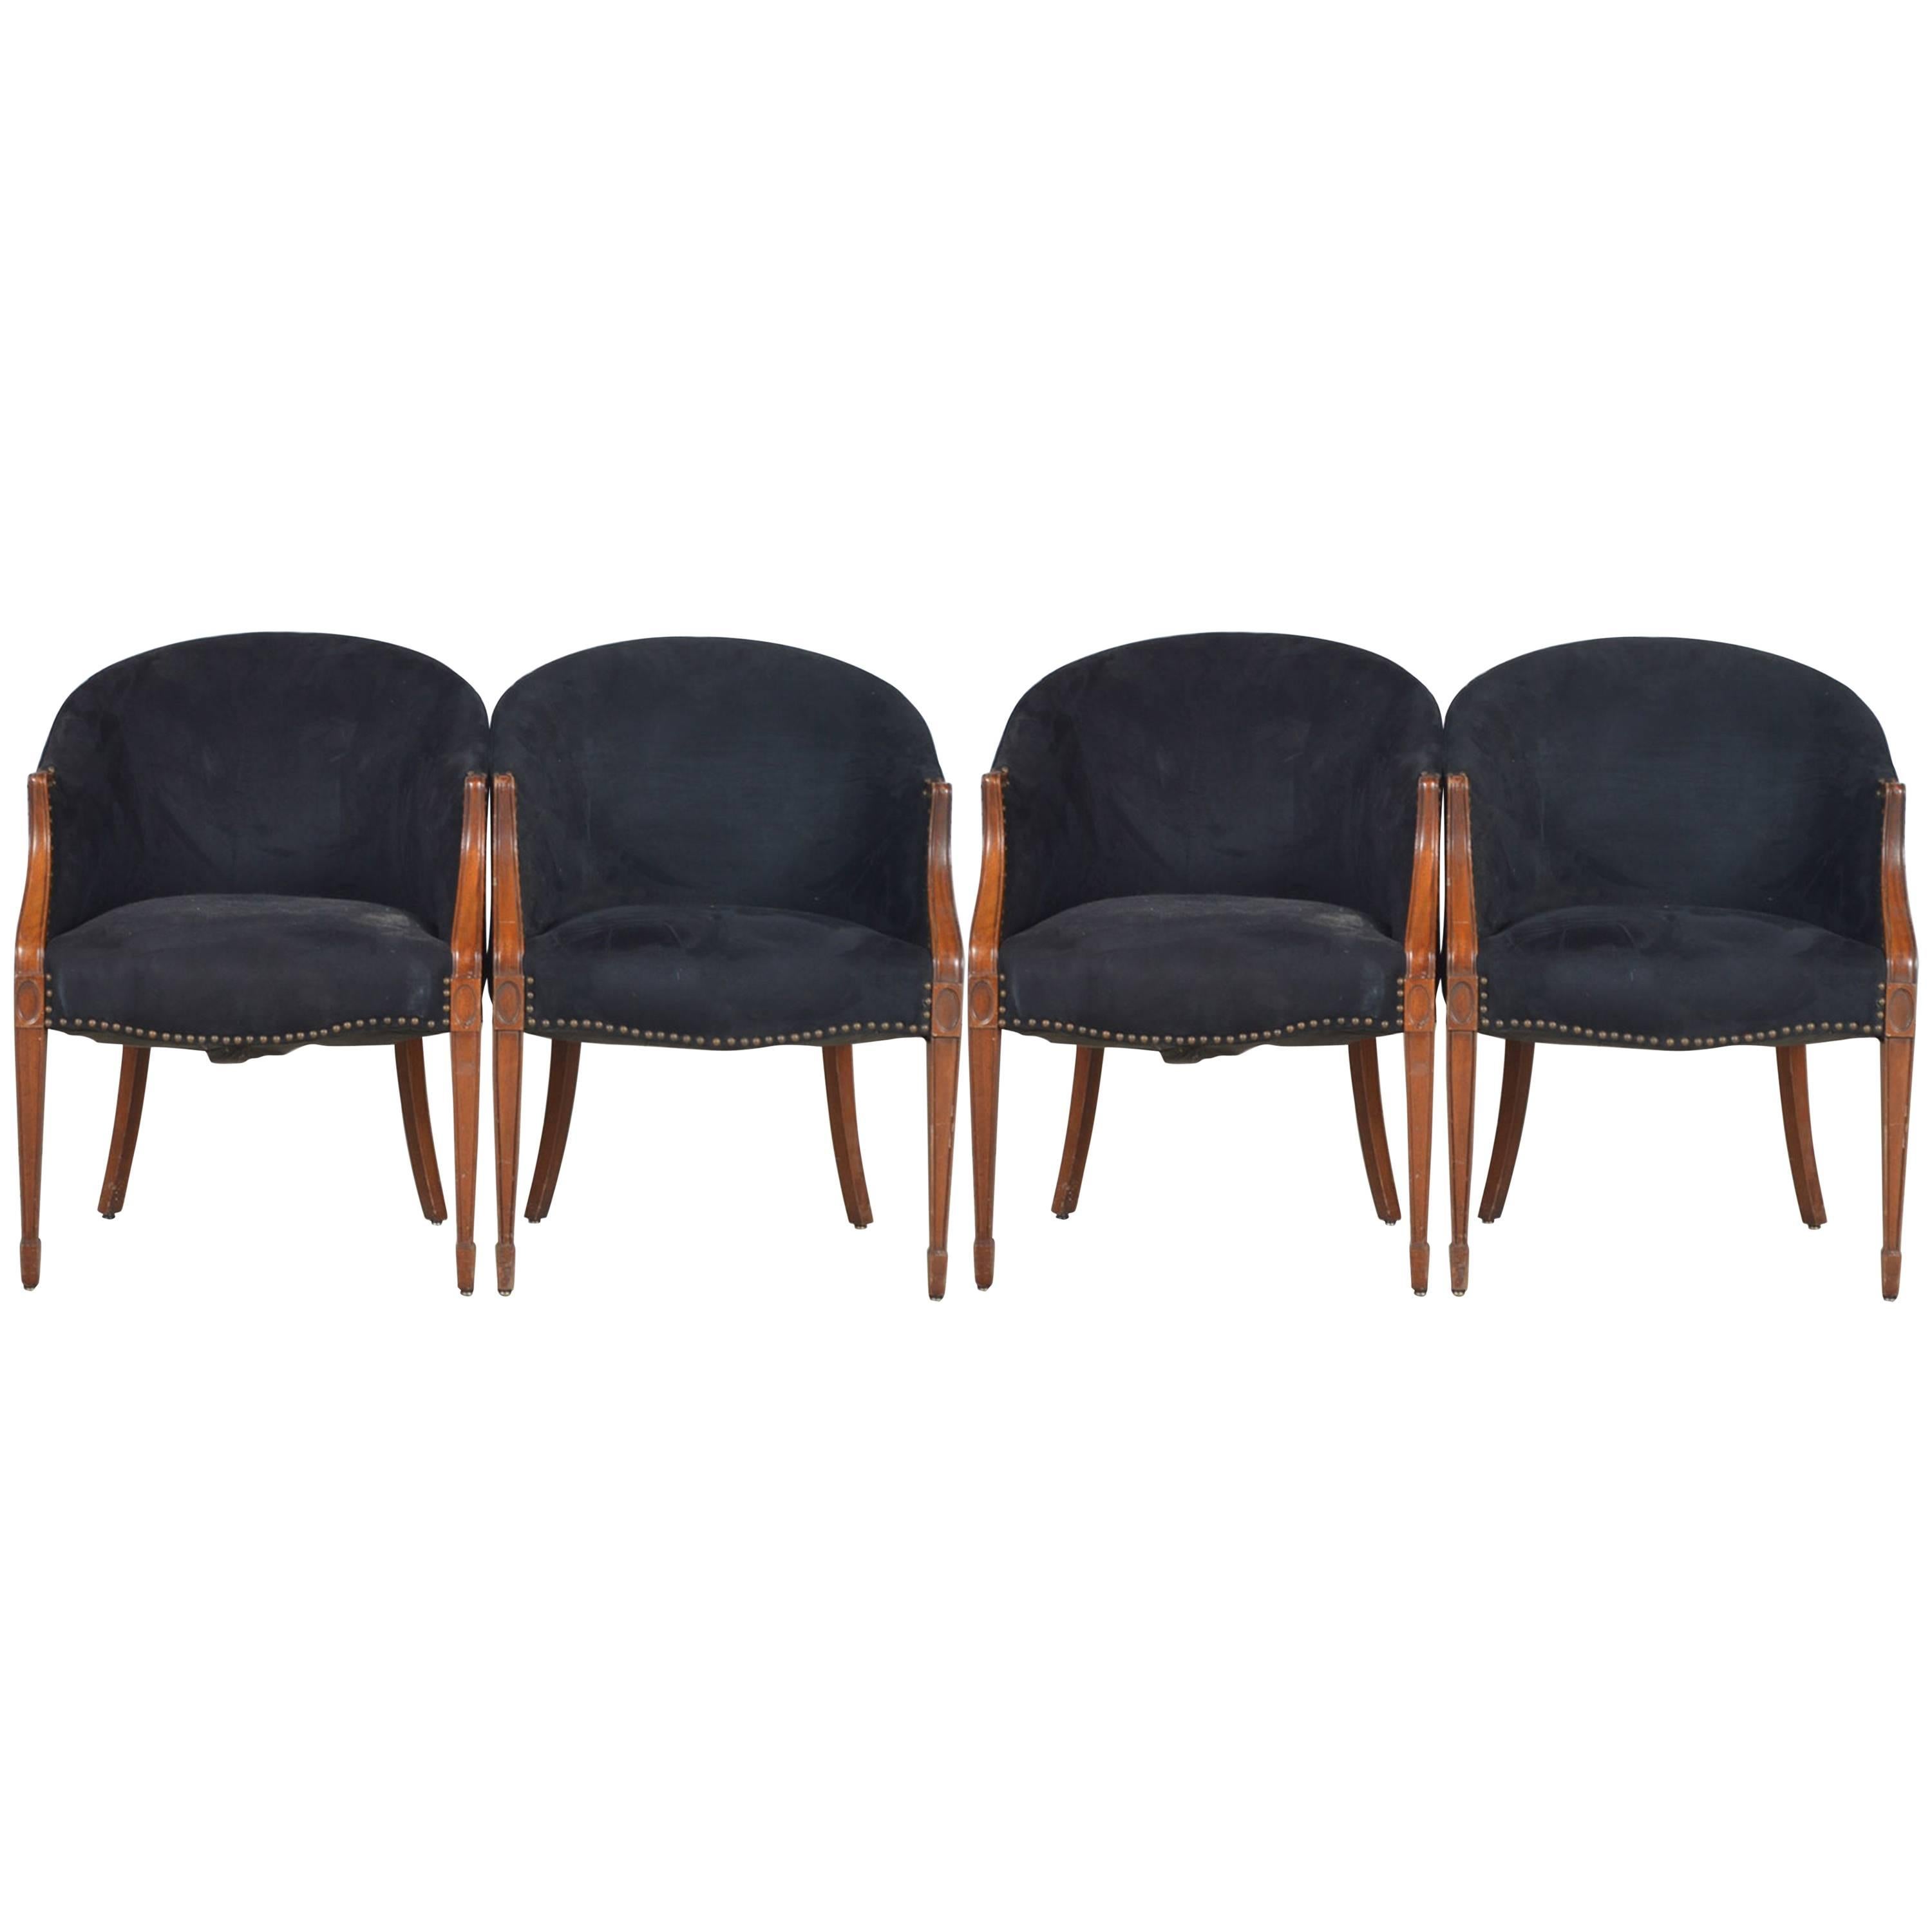 Four Black Neoclassical Side Chairs with Nailhead Details